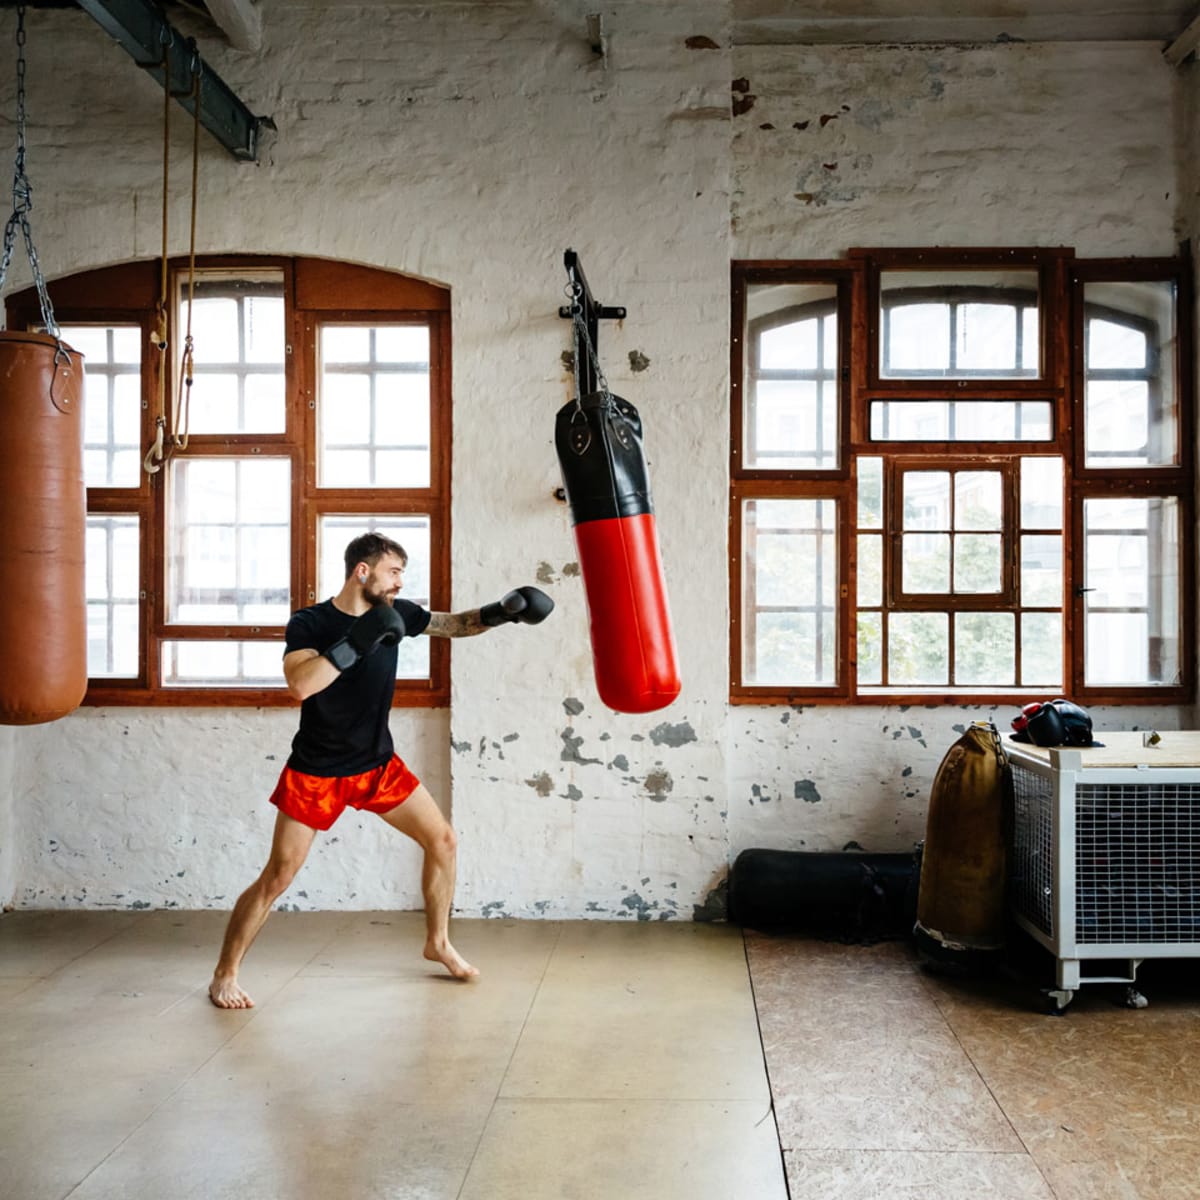 5 Boxing Workout Routines to Get in Lean Fighting Shape - Men's Journal